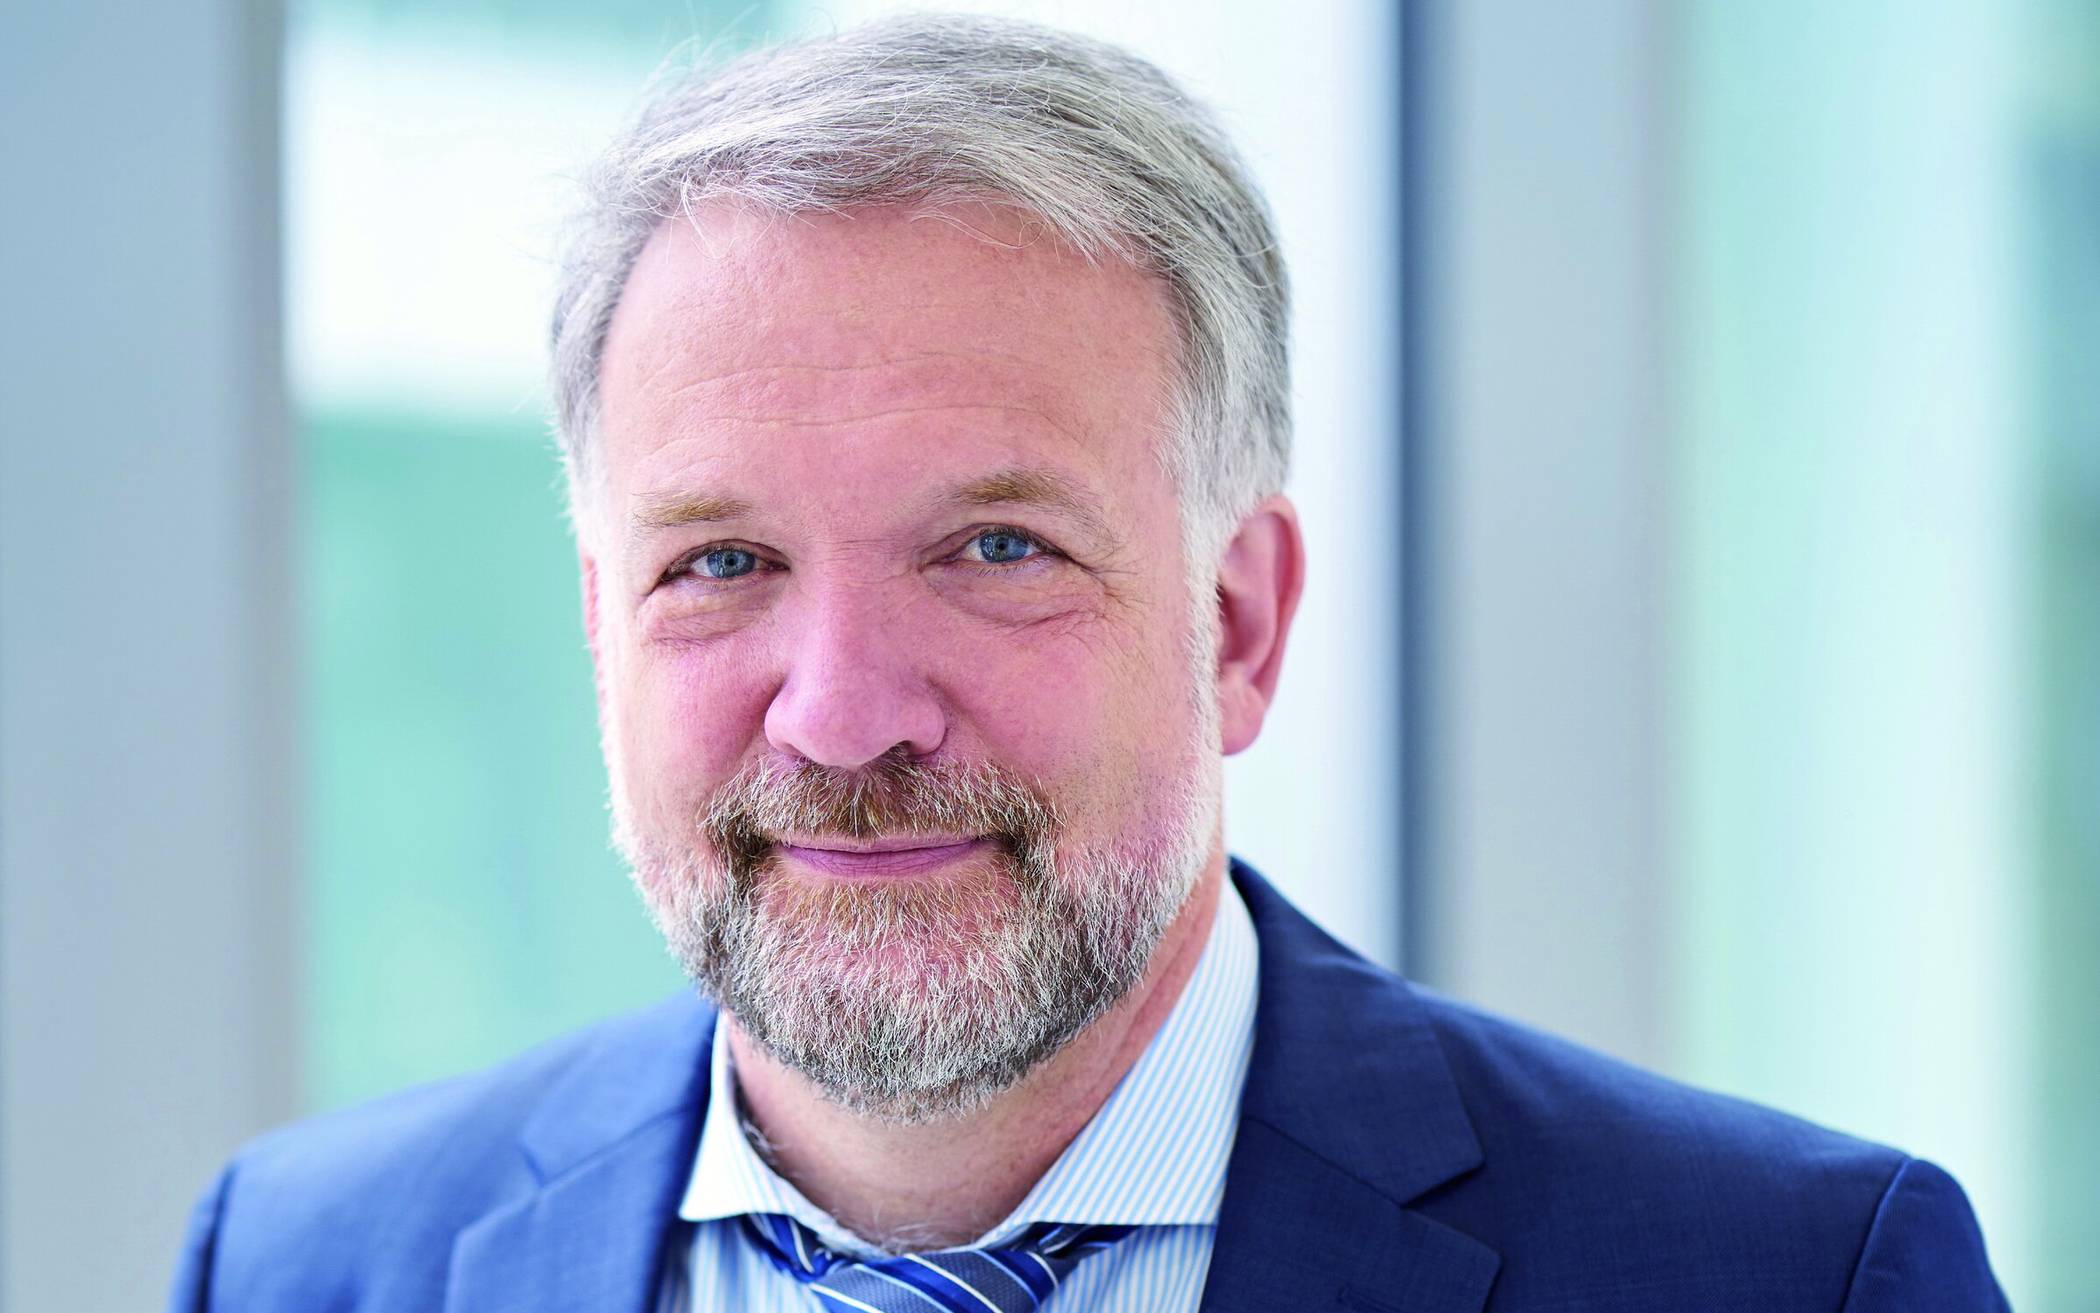 Prof. Dr. Andreas Frommer ist Prorektor